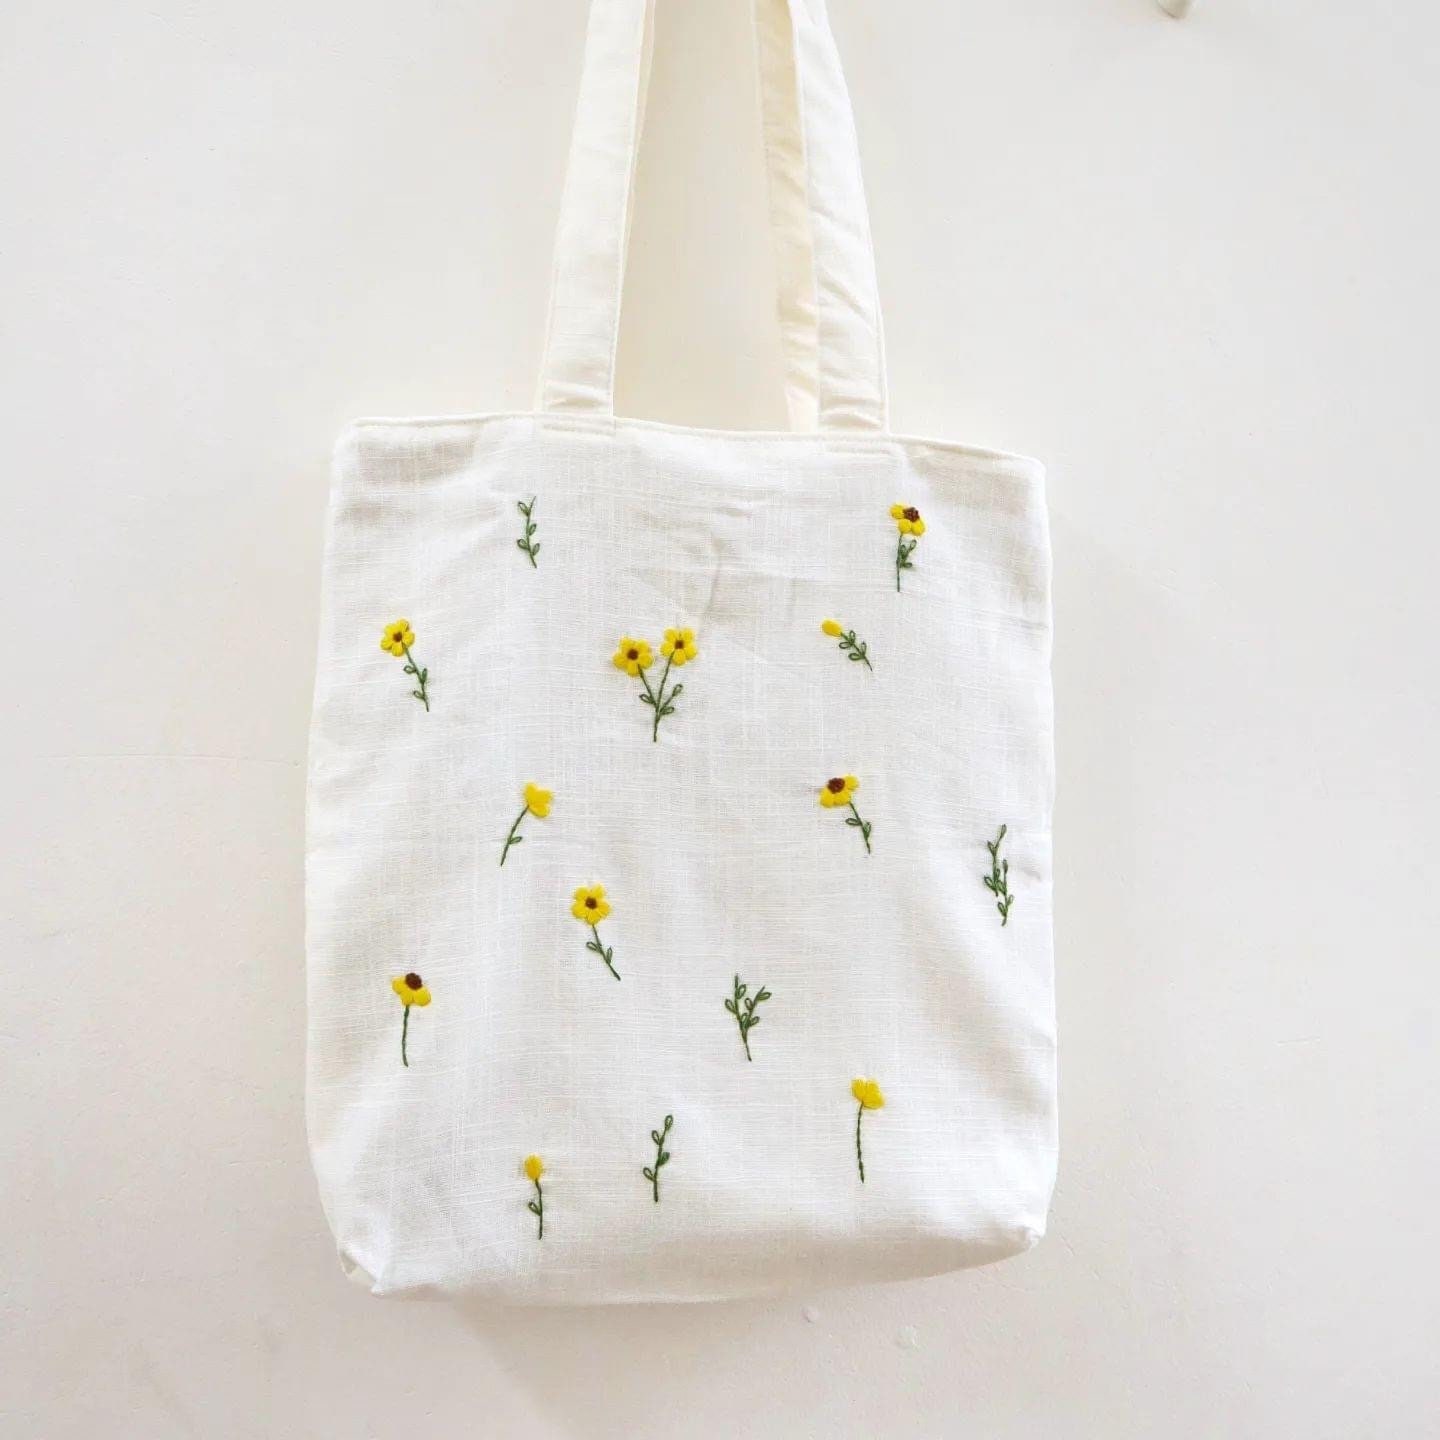 Lavender Garden Embroidered Canvas Tote Bag With Zipper and Pocket, Wild  Flower Bag, Hand Embroidered Tote, Personalised Bag,shopping Bag 